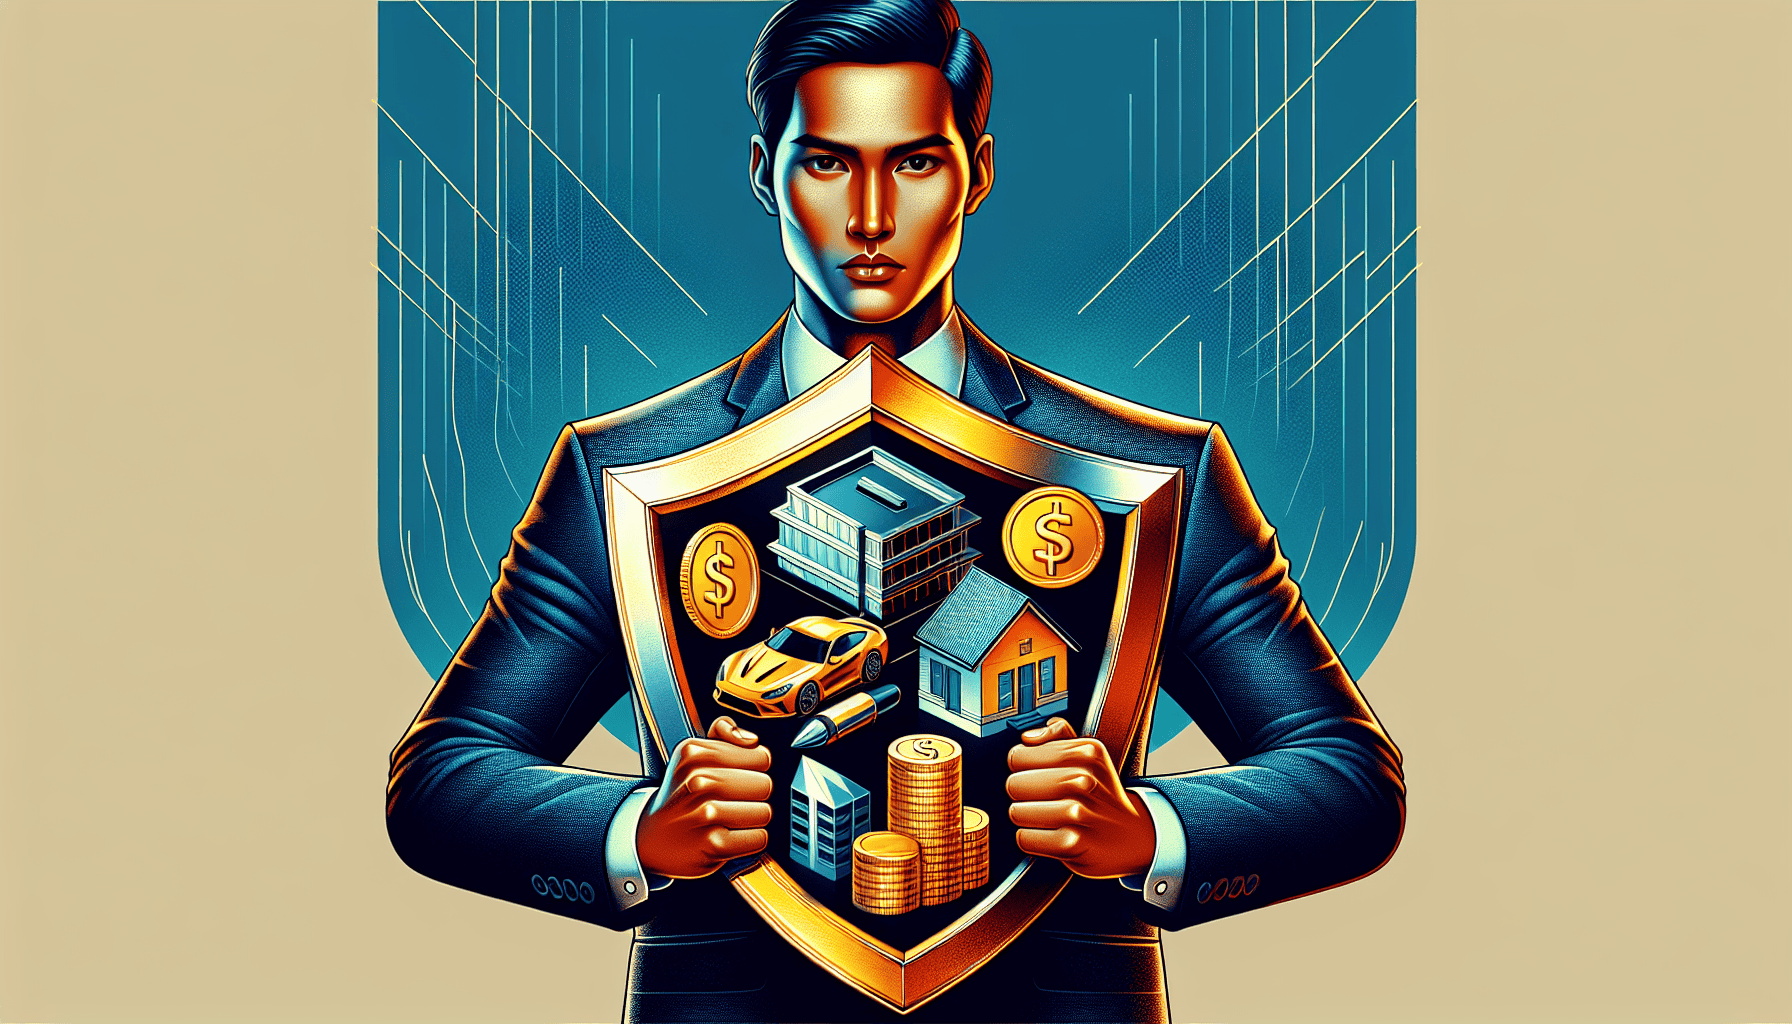 Illustration of a businessman protecting assets